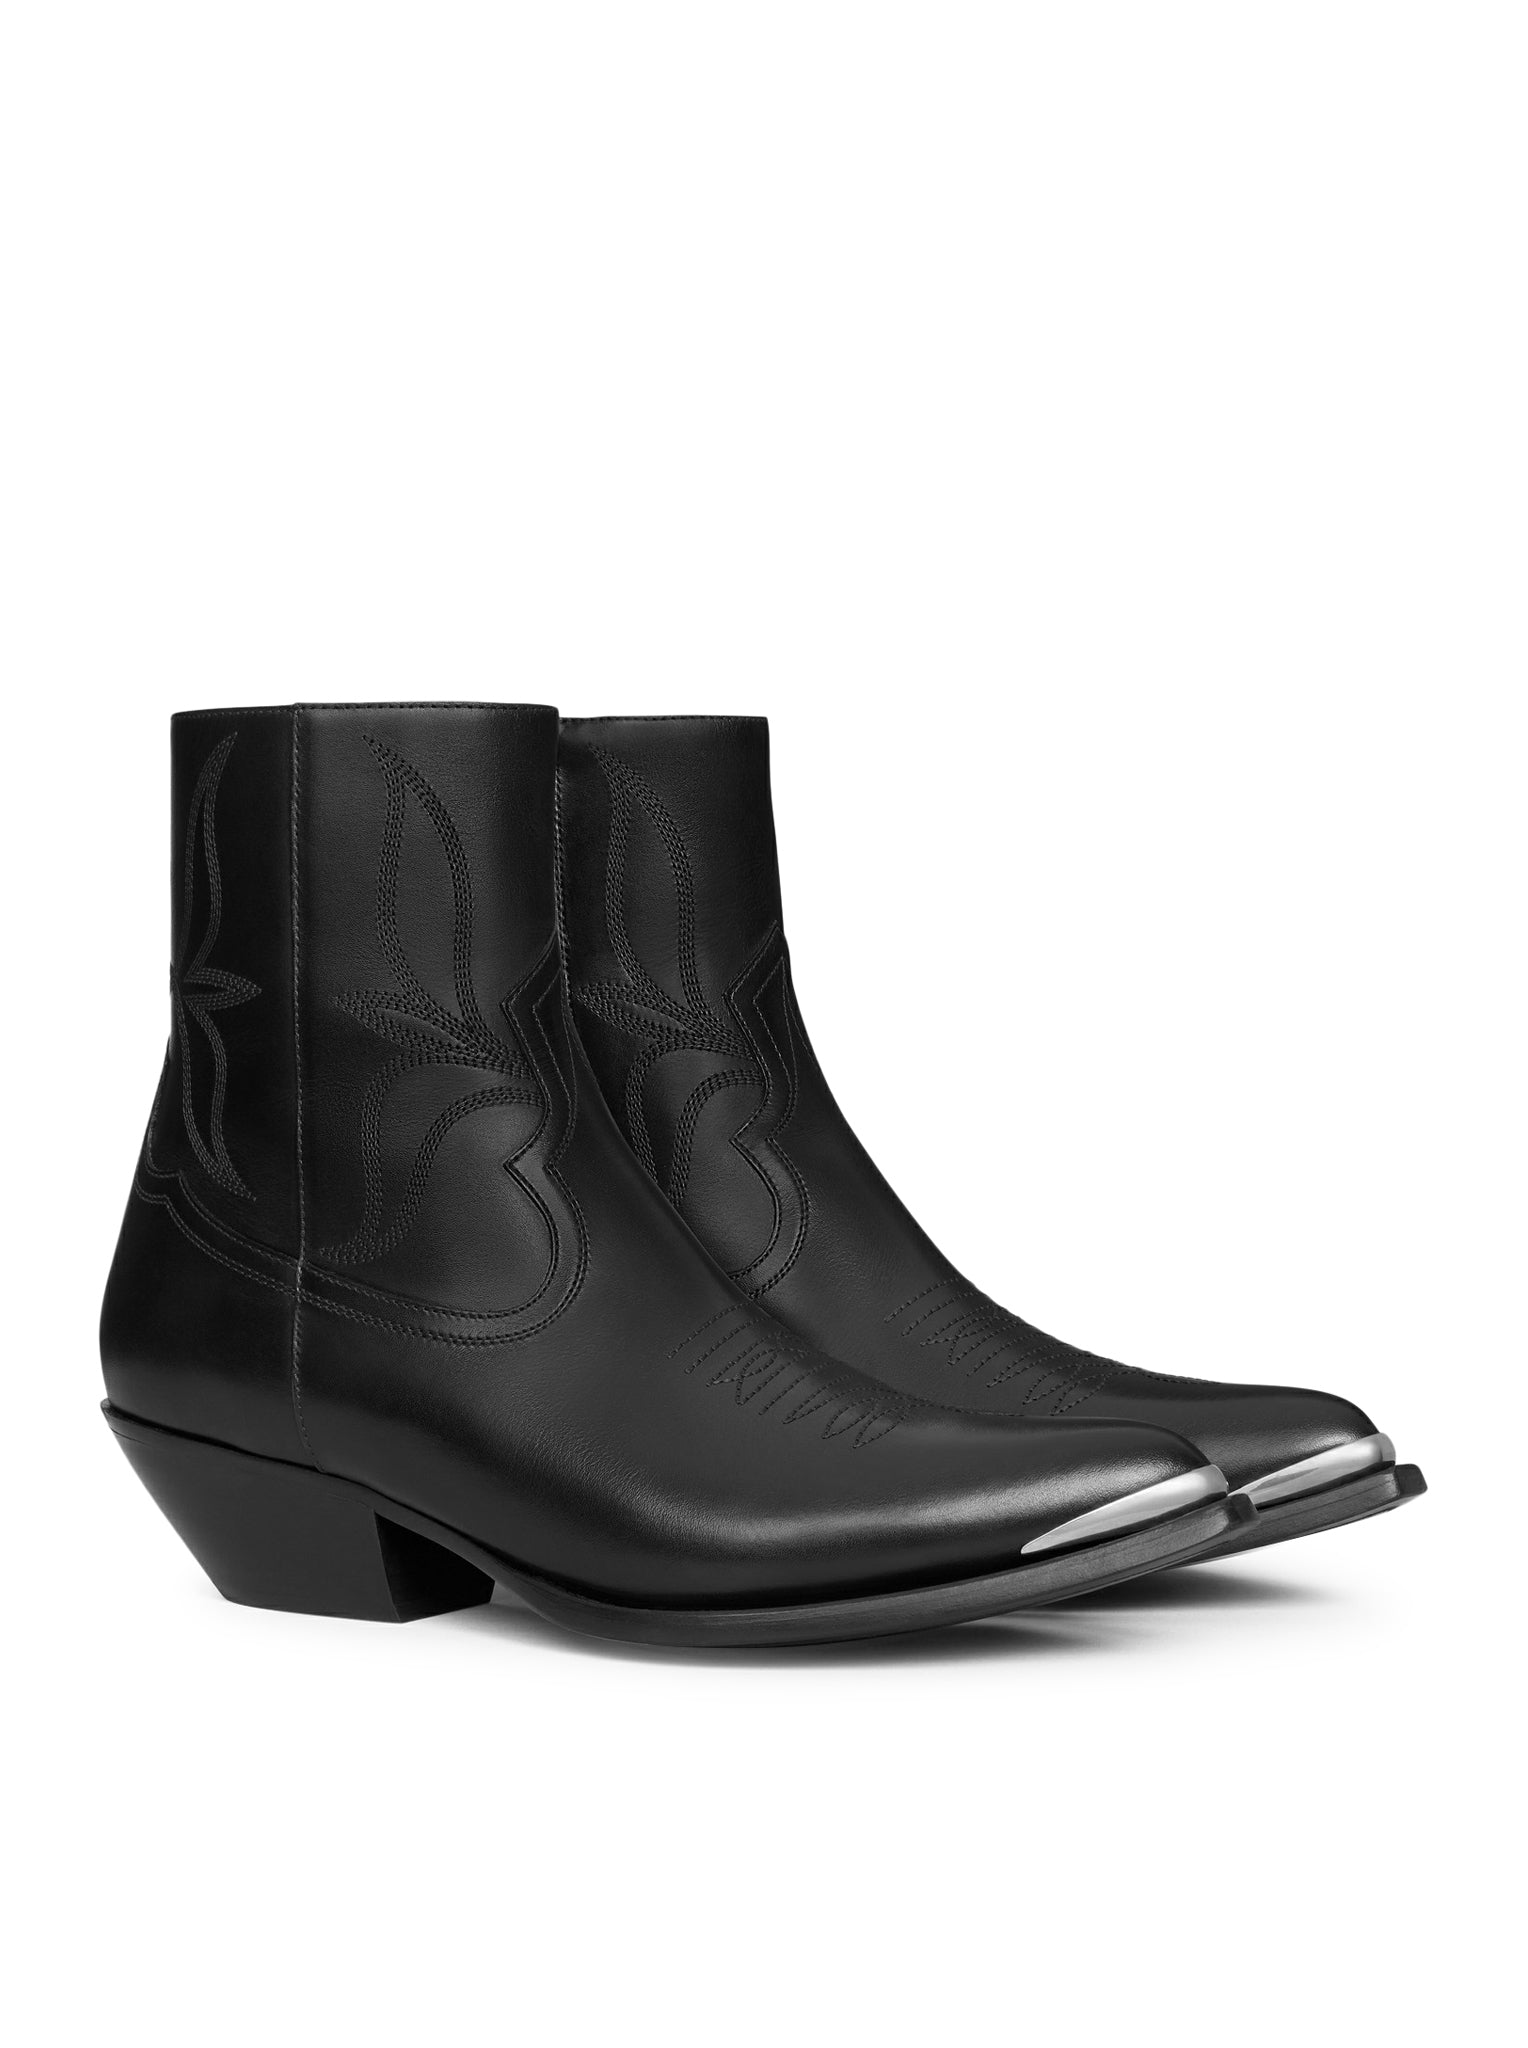 CELINE LEON BOOT WITH ZIP AND METAL TOE IN POLISHED CALFSKIN